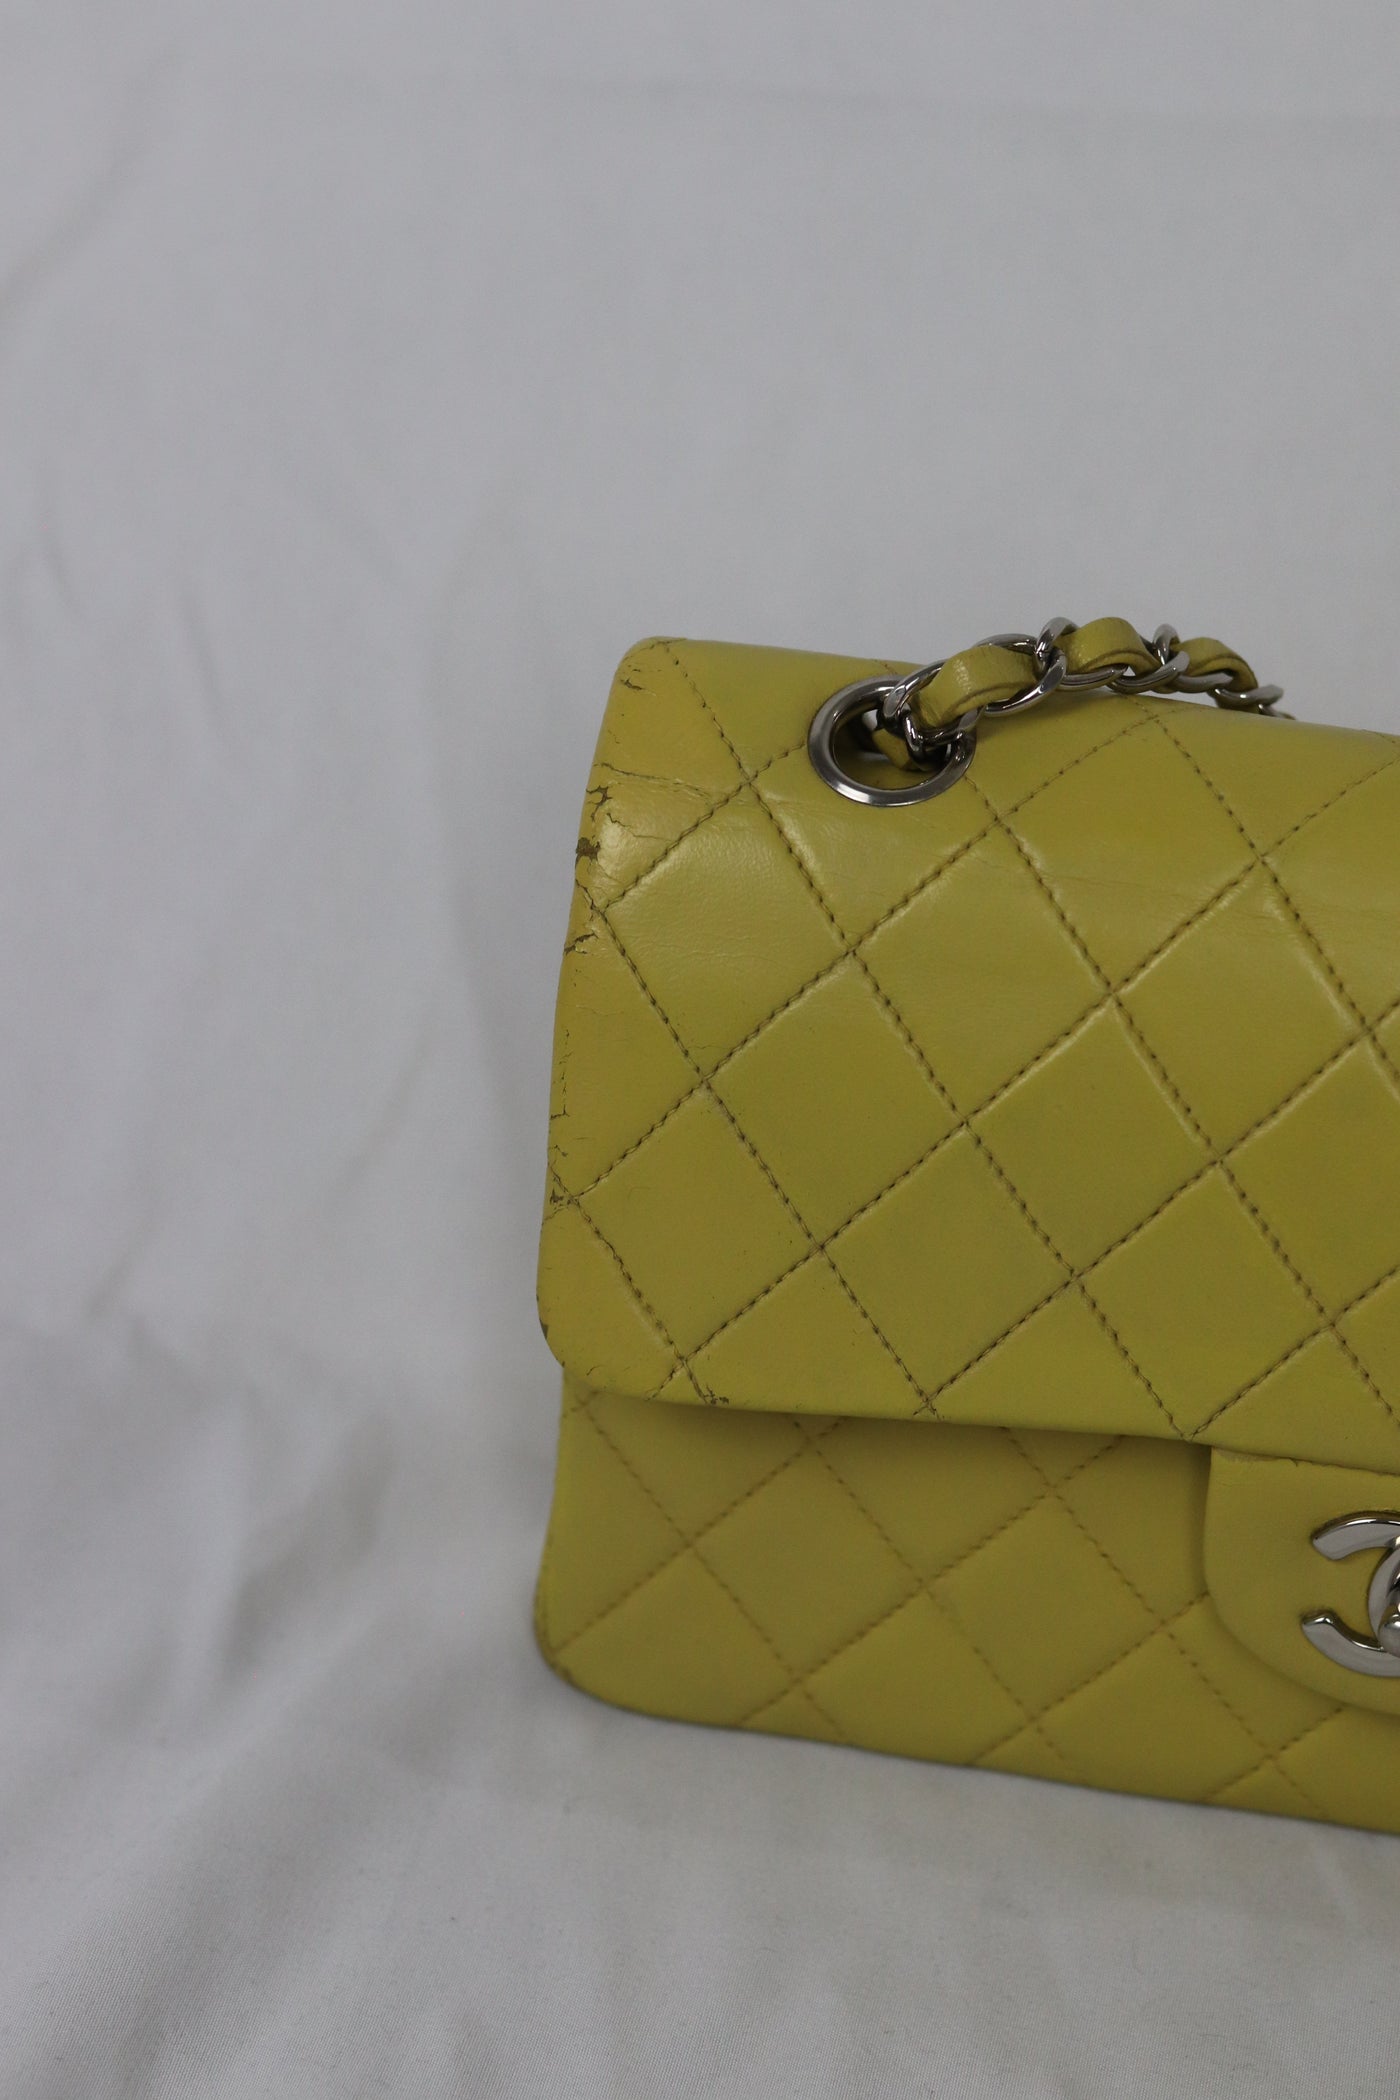 CHANEL Small Vintage Classic Double Flap Bag Yellow Silver Hardware